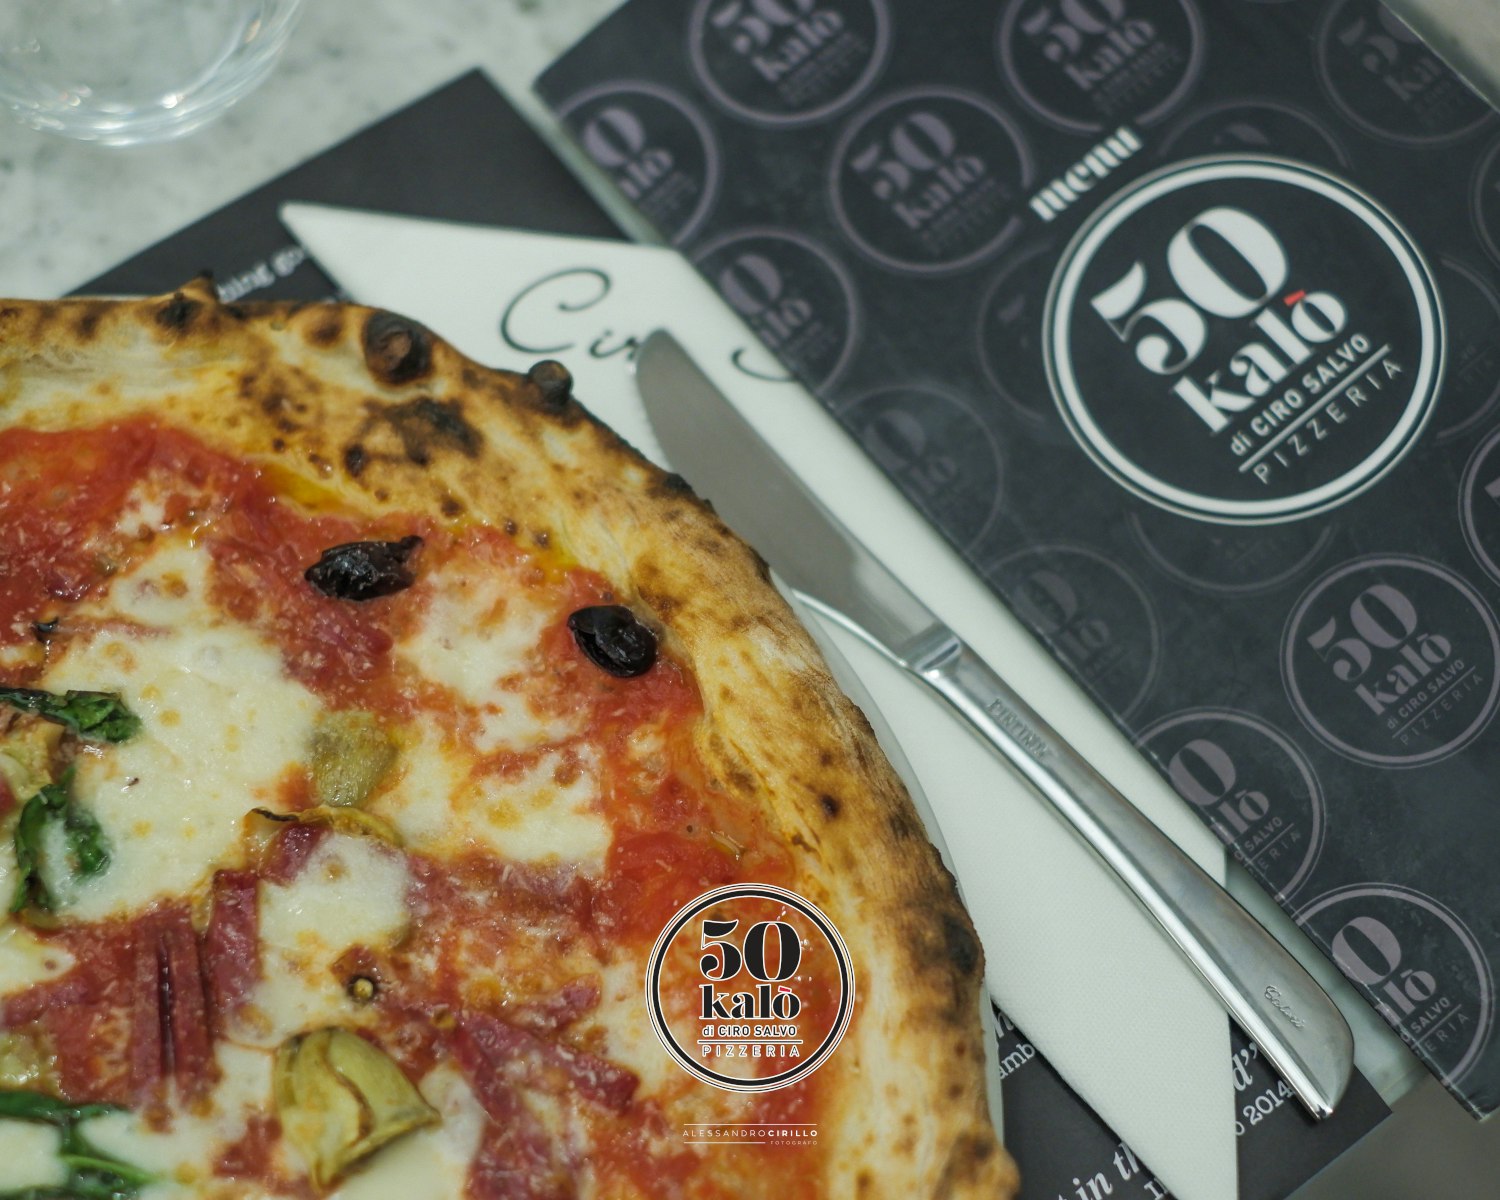 A picture of a pizza on a table with the 50 kalò menu